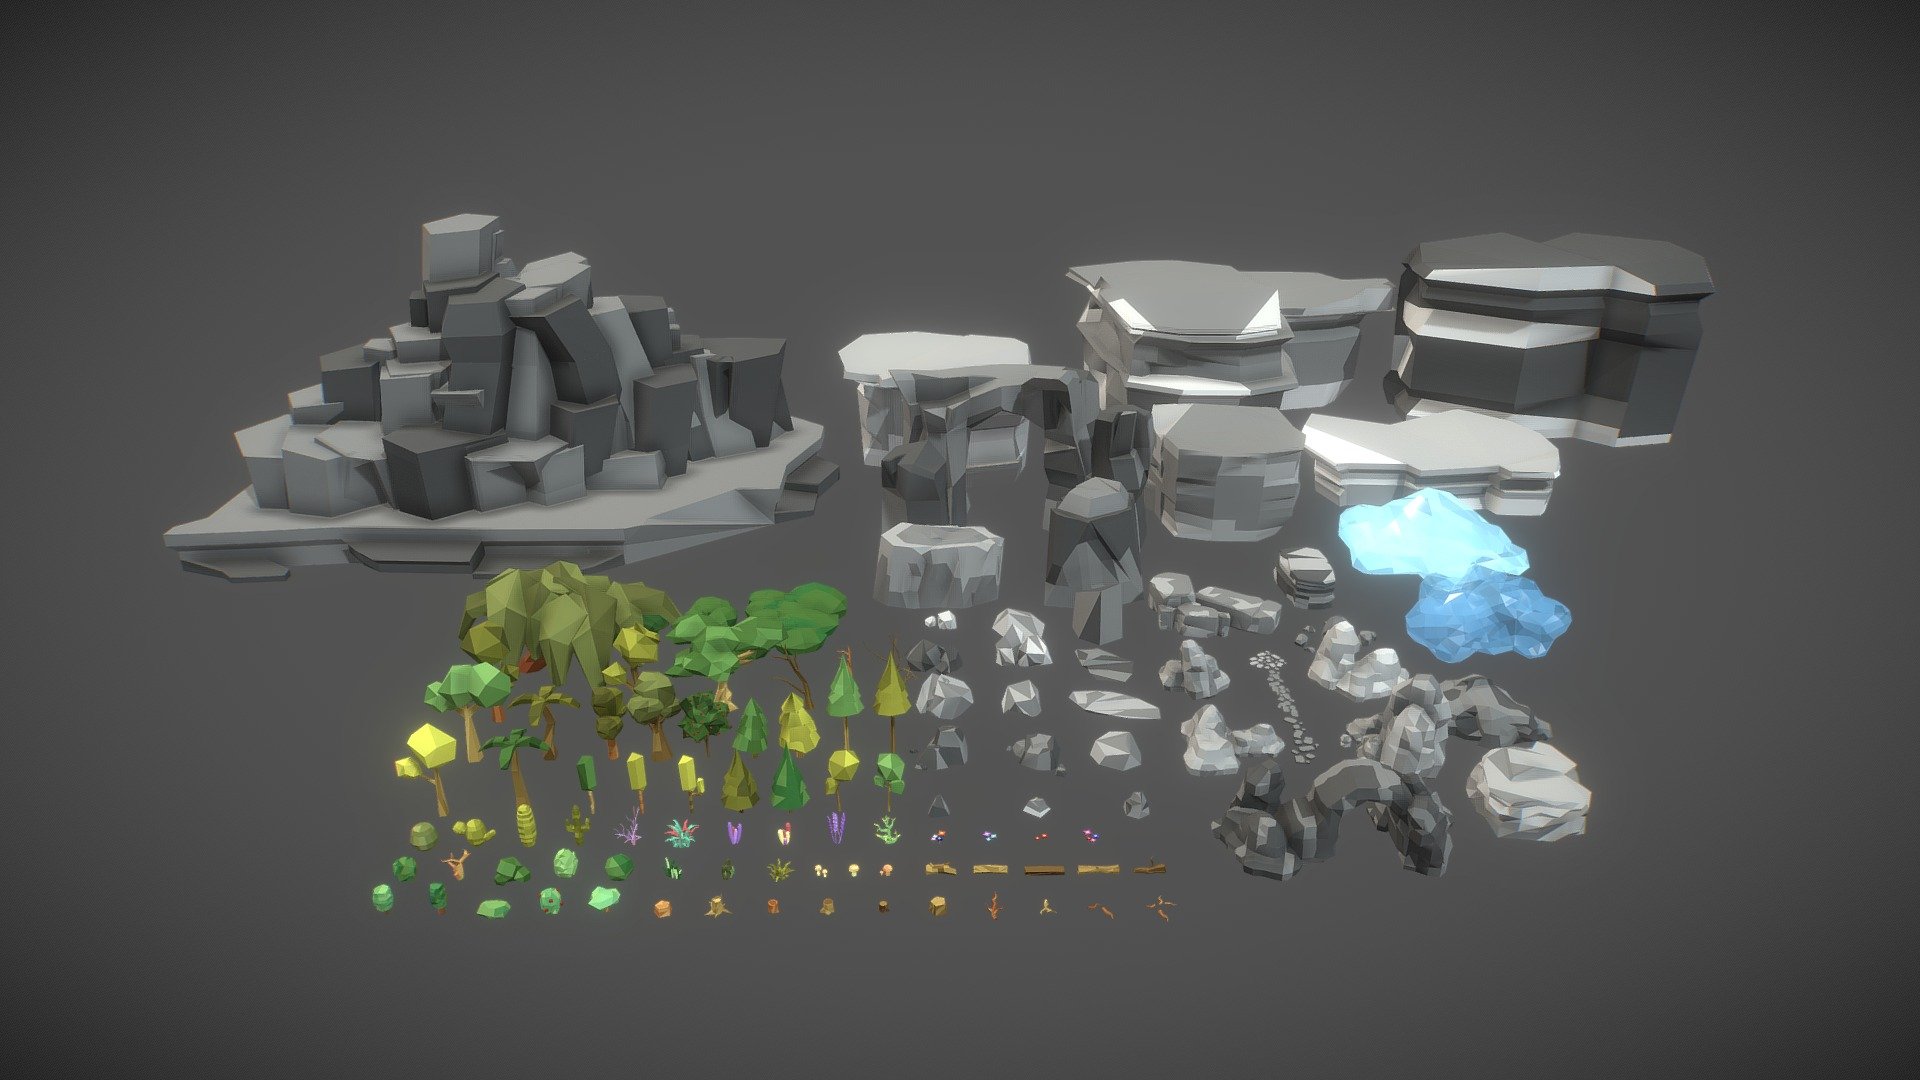 This package includes all individual models with clean topology in a zip file inside the package. The preview model appears to not have clean topology only because it was exported from Unity.

Polygonal Foliage is a high quality asset package for your polygonal or prototype game ideas!


The package uses a single atlas texture that has base colors for all the models. This ensures fantastic visuals and unparalleled performance.
Includes 120+ foliage assets! These include bushes, trees, flowers, logs, stumps, mushrooms, debris, rocks, cliffs, plants, paths, clouds and more!

Support email : alignedgames@mailbox.co.za

Aligned Games website : https://alignedgames.com/ - Polygonal Foliage Asset Package - Buy Royalty Free 3D model by Aligned Games (@Johannesnienaber) 3d model